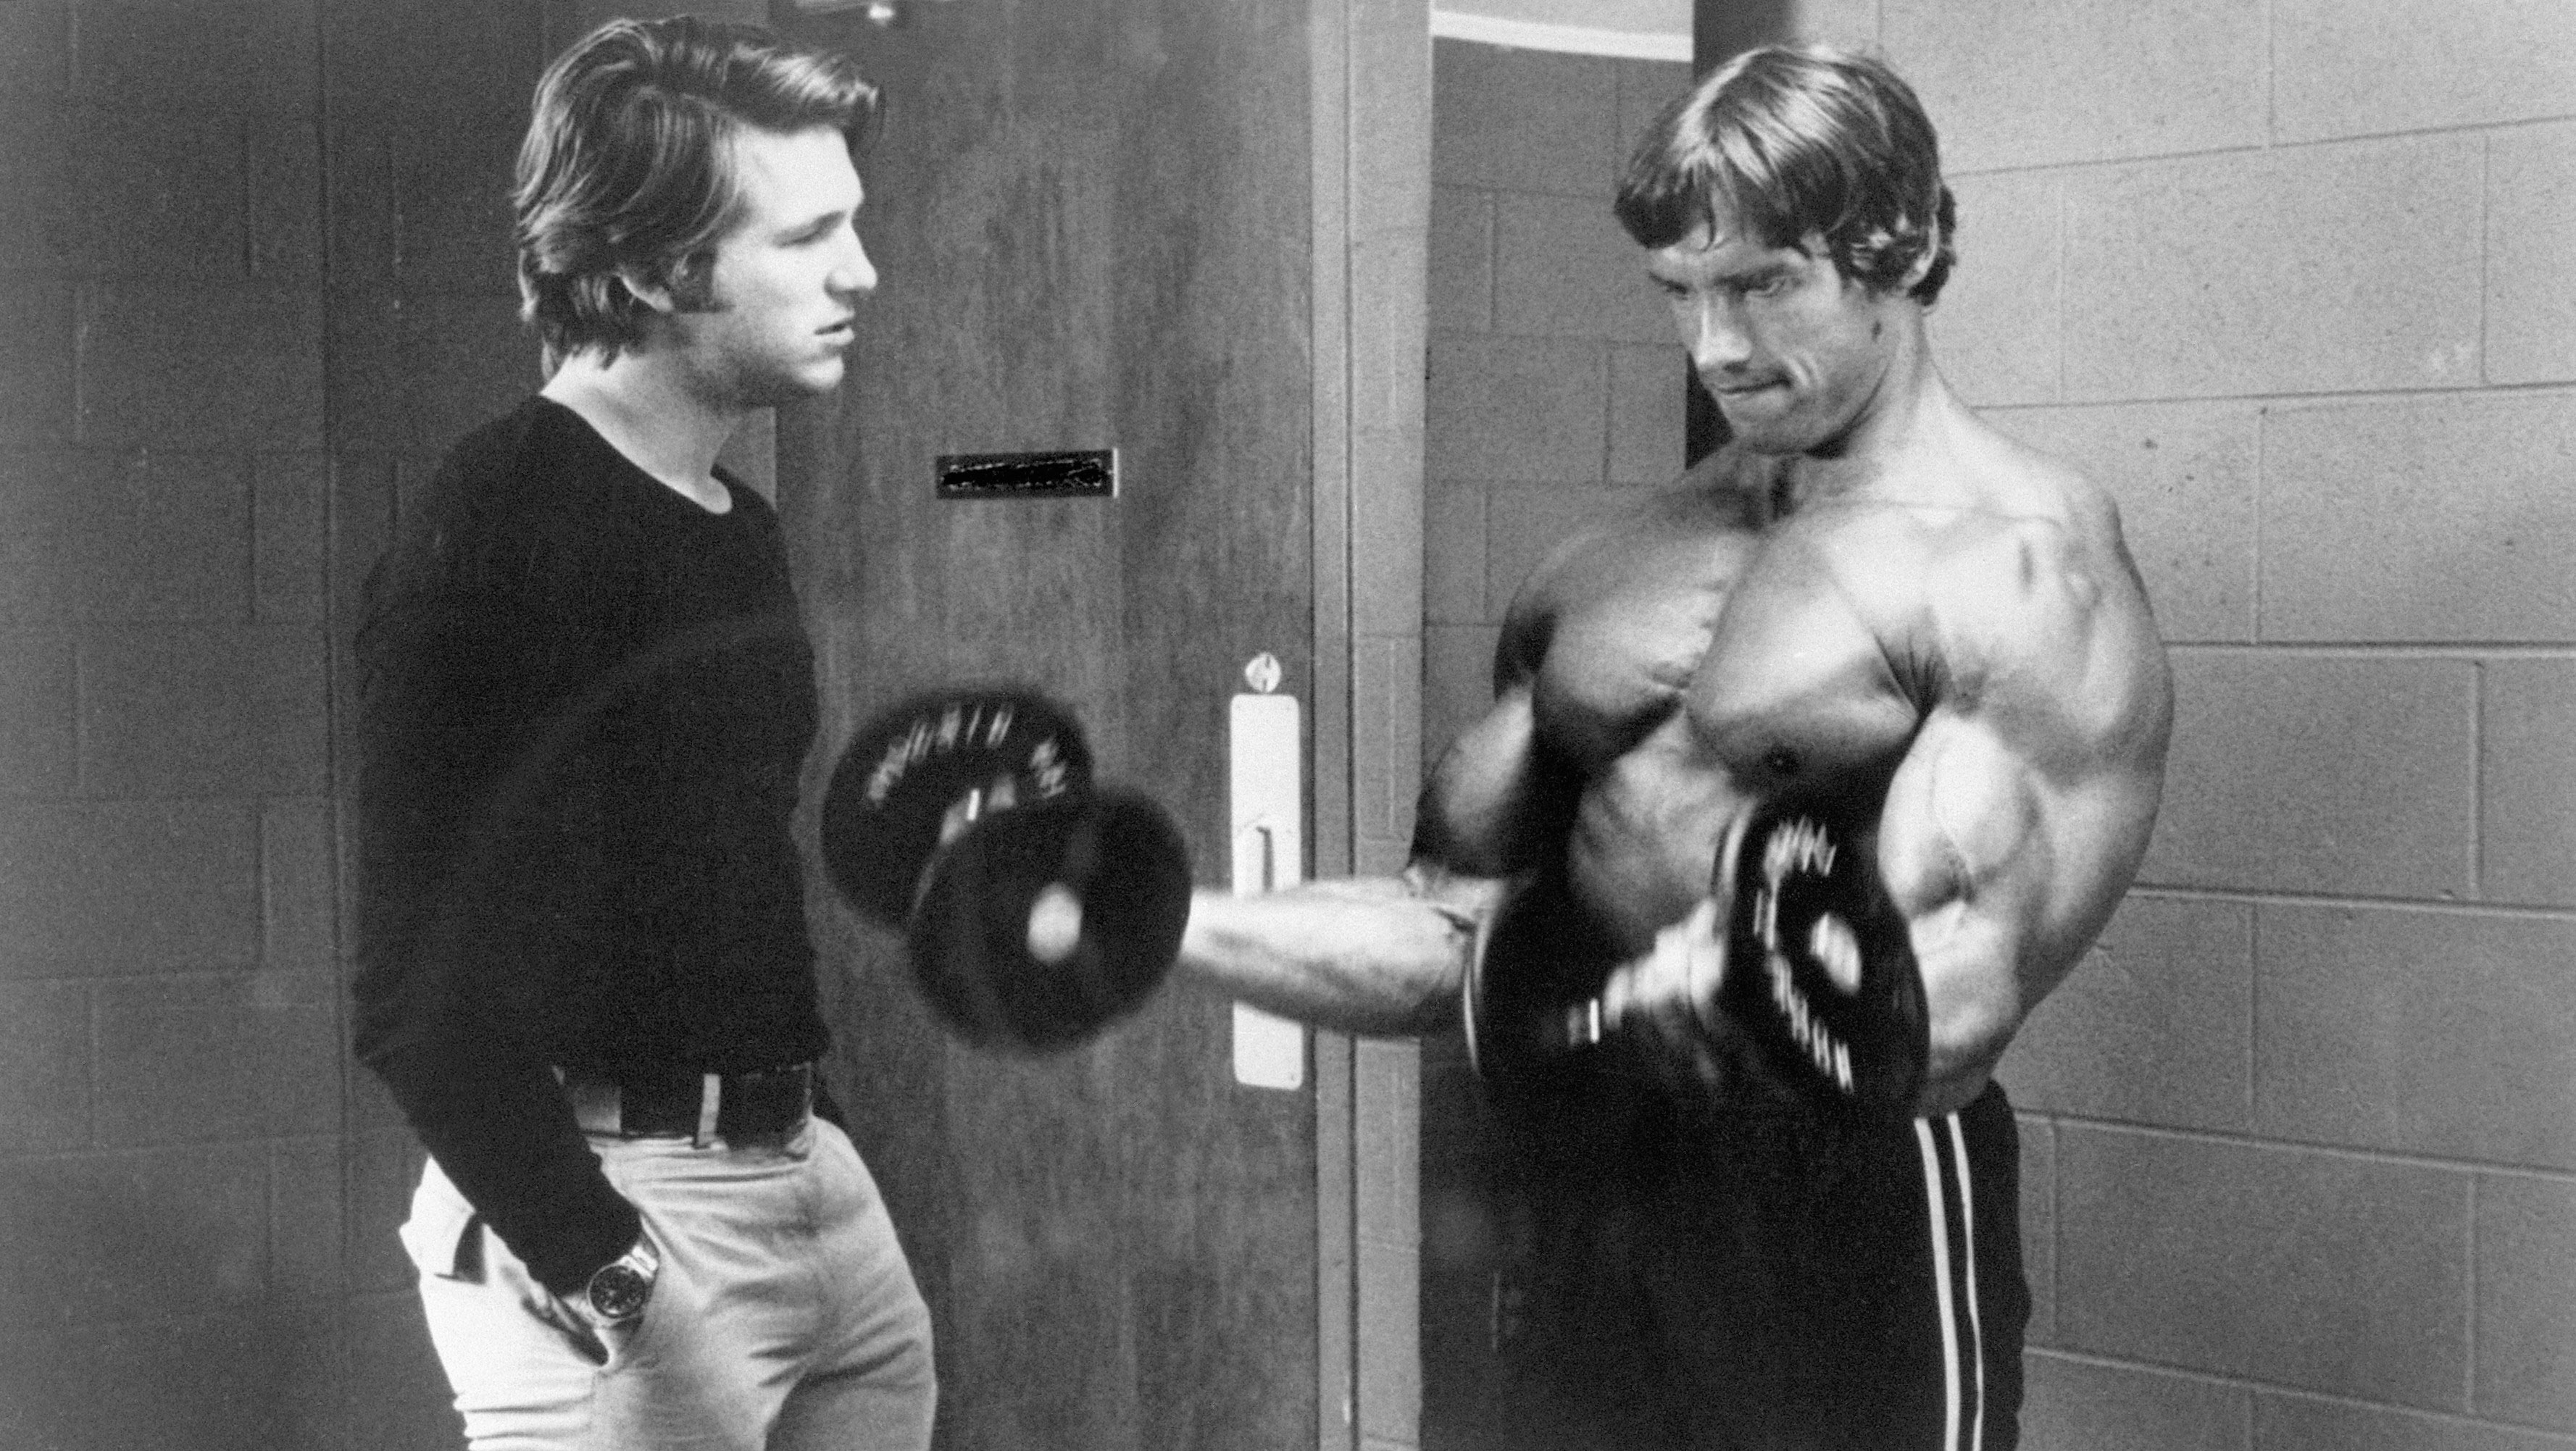 The Top 10 Movies Every Bodybuilder Must photo